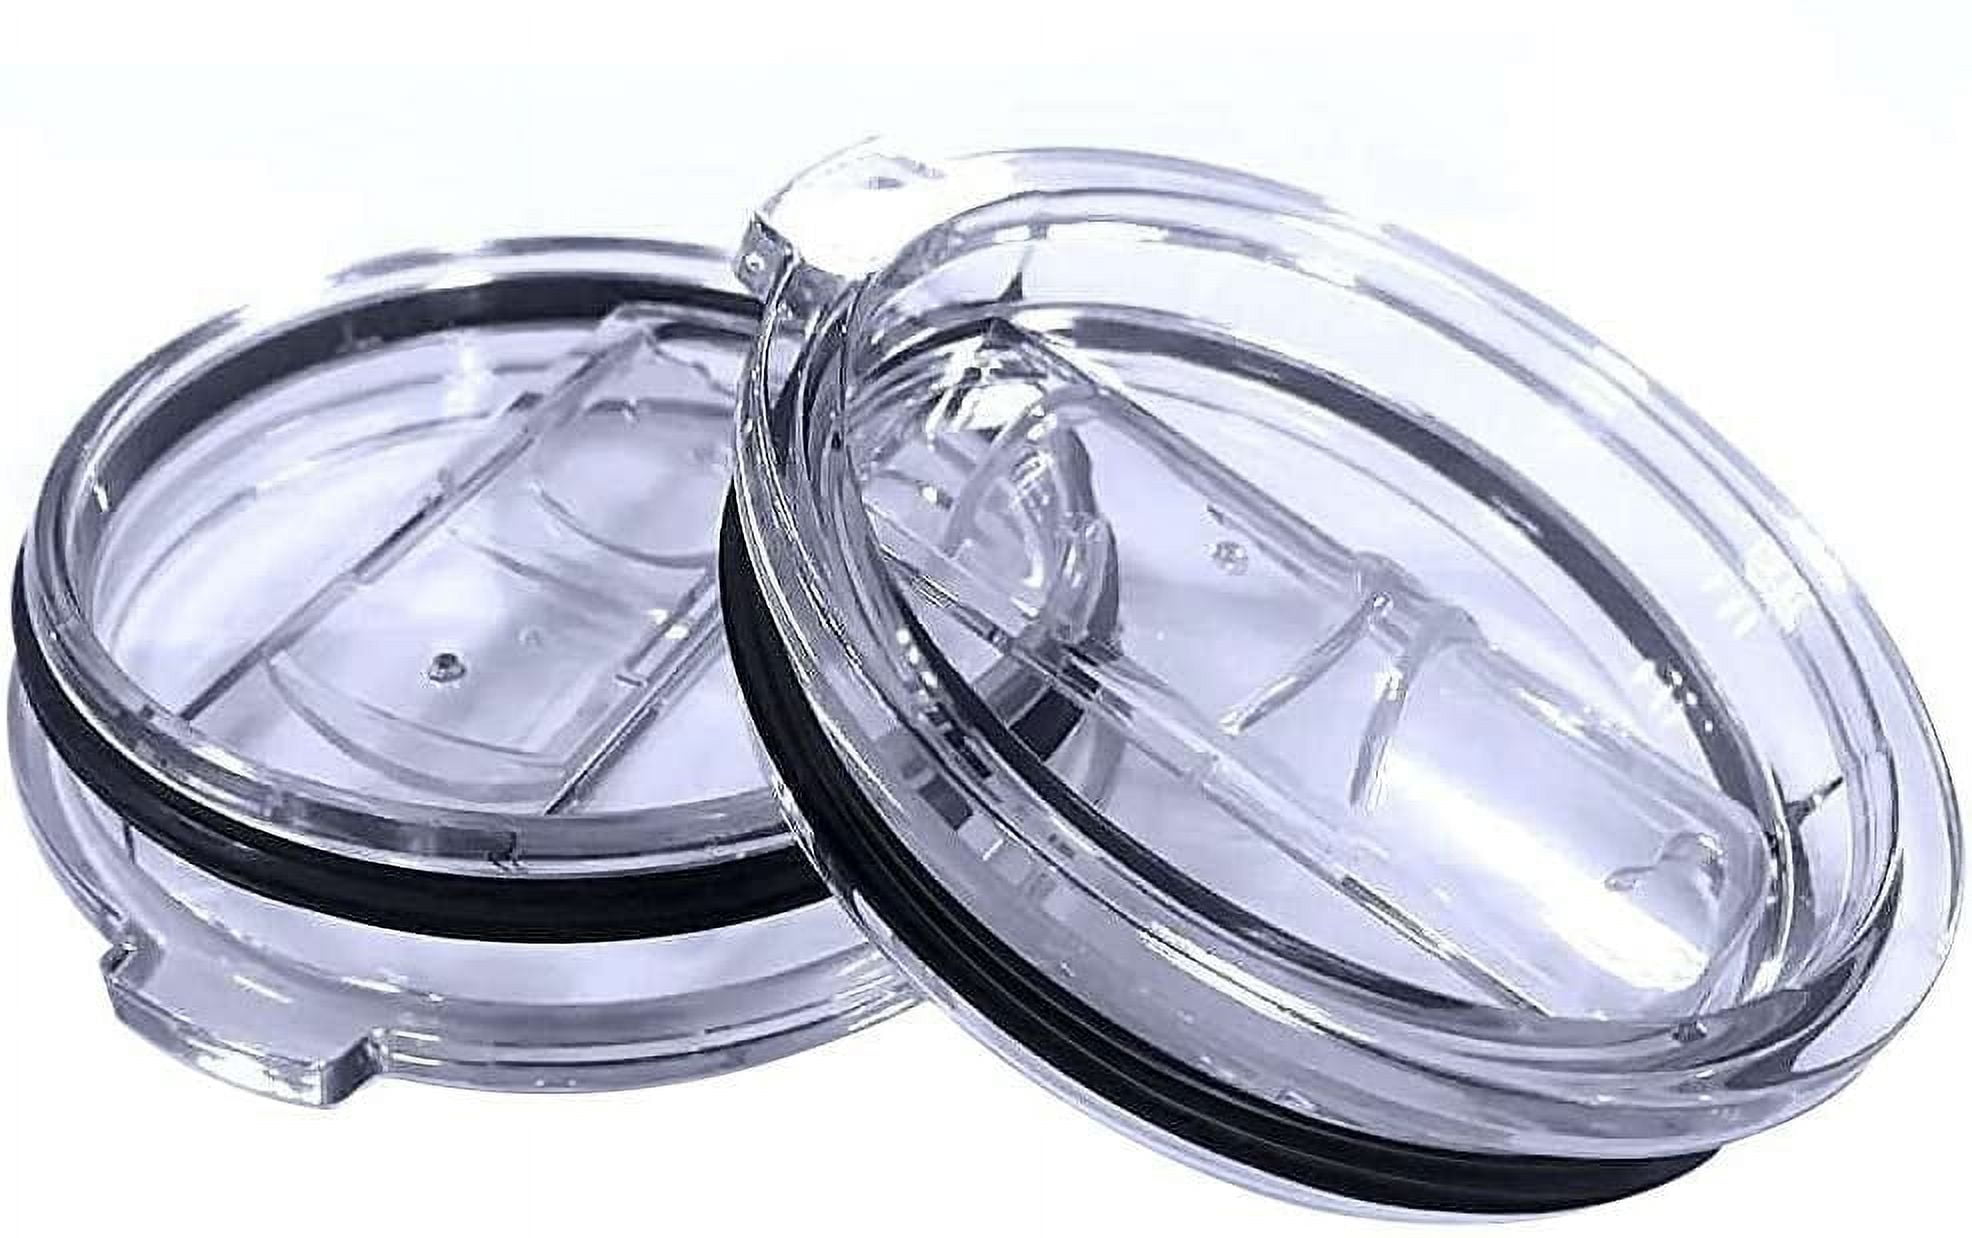 3 Replacement Lids for Stainless Steel Tumbler Travel Cup, Leak